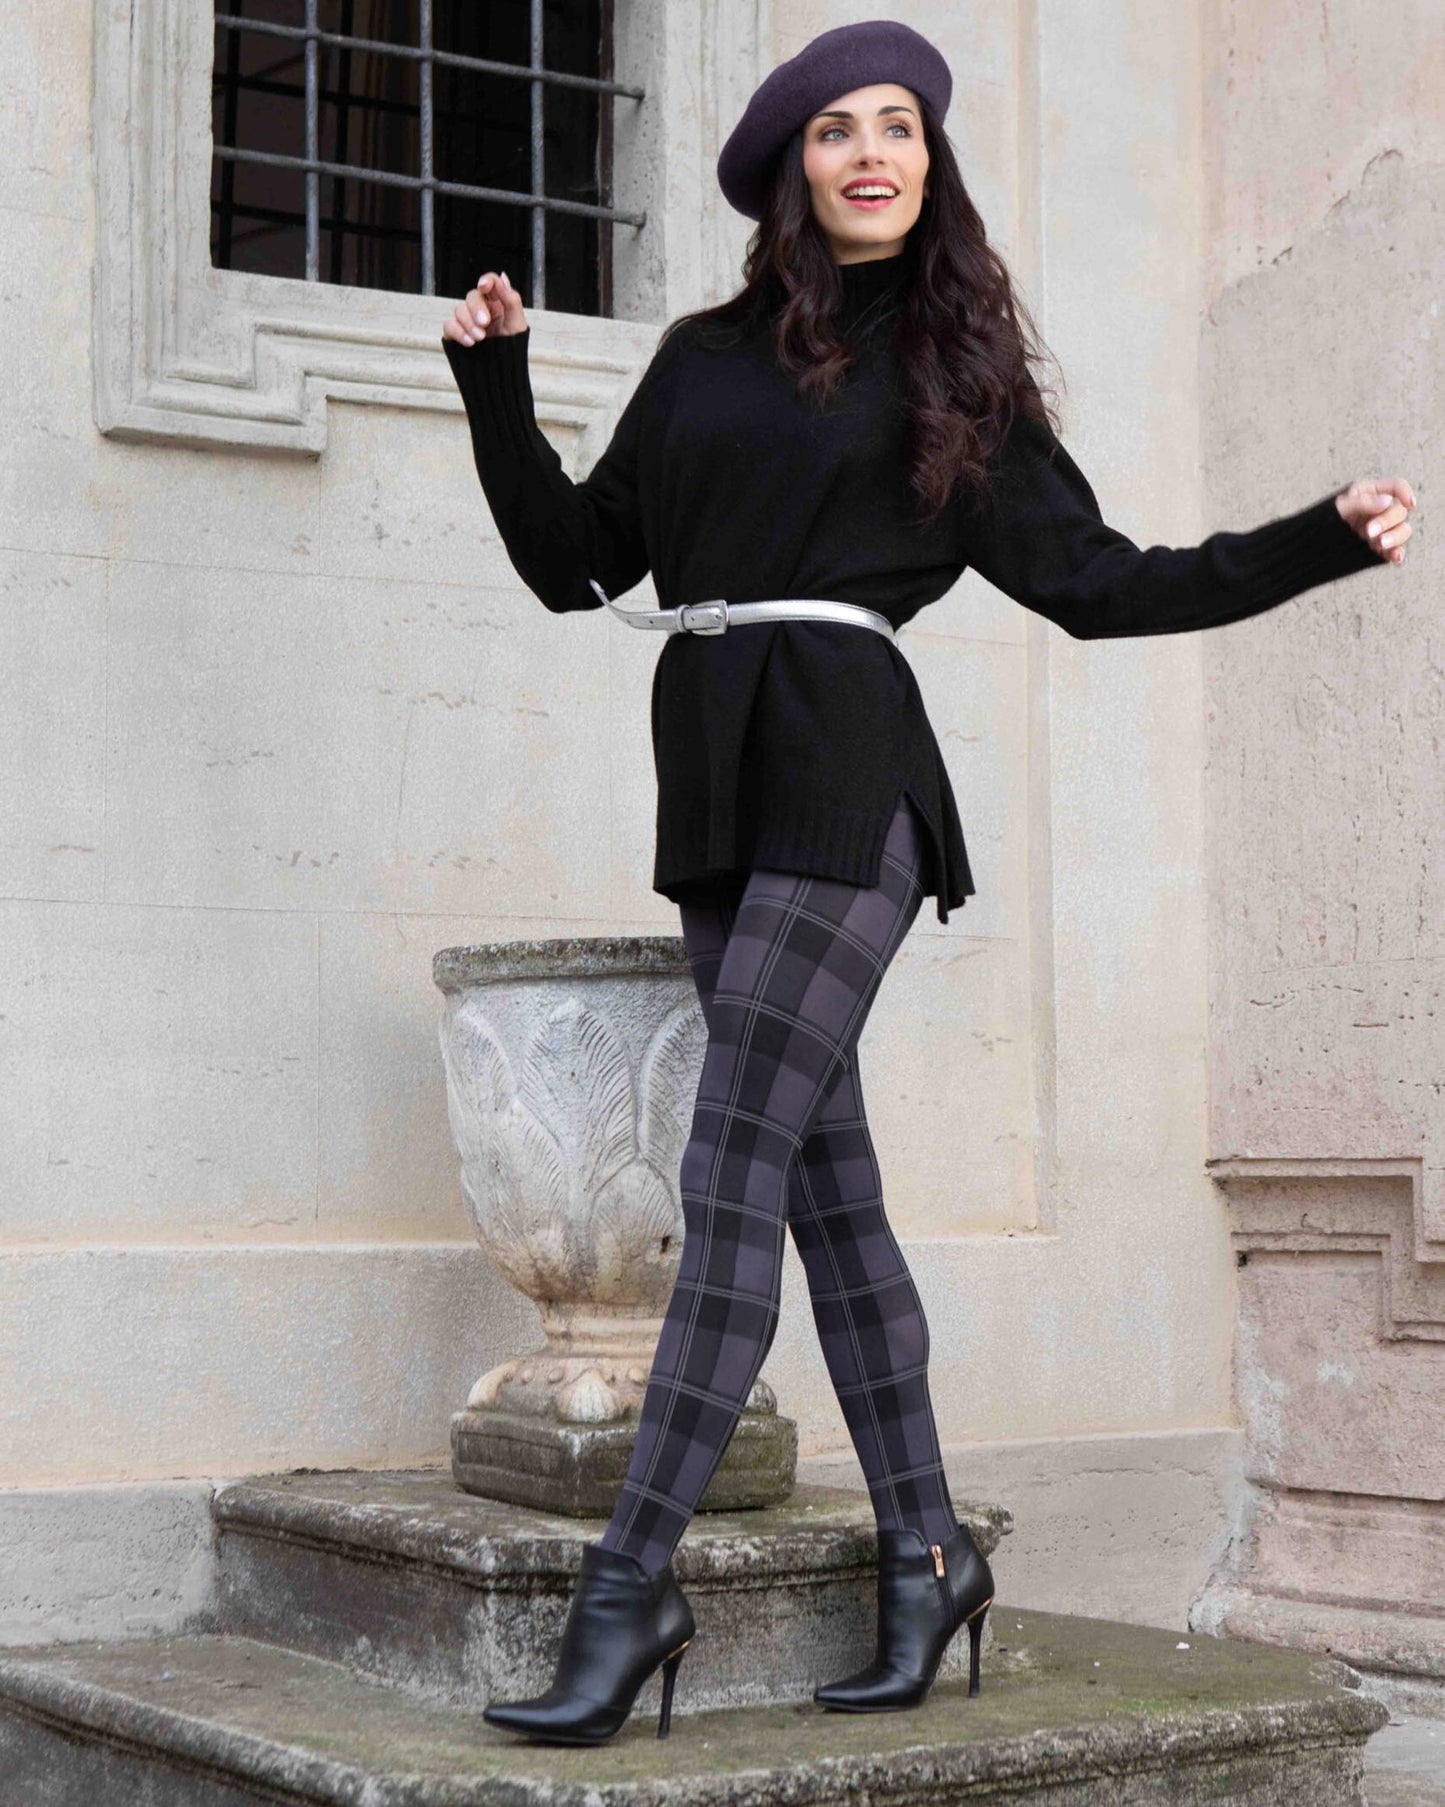 Omero Tartan 50 Collant - Grey opaque fashion tights with a black woven tartan style pattern, worn with high heel boots, short jumper dress, belt and beret.